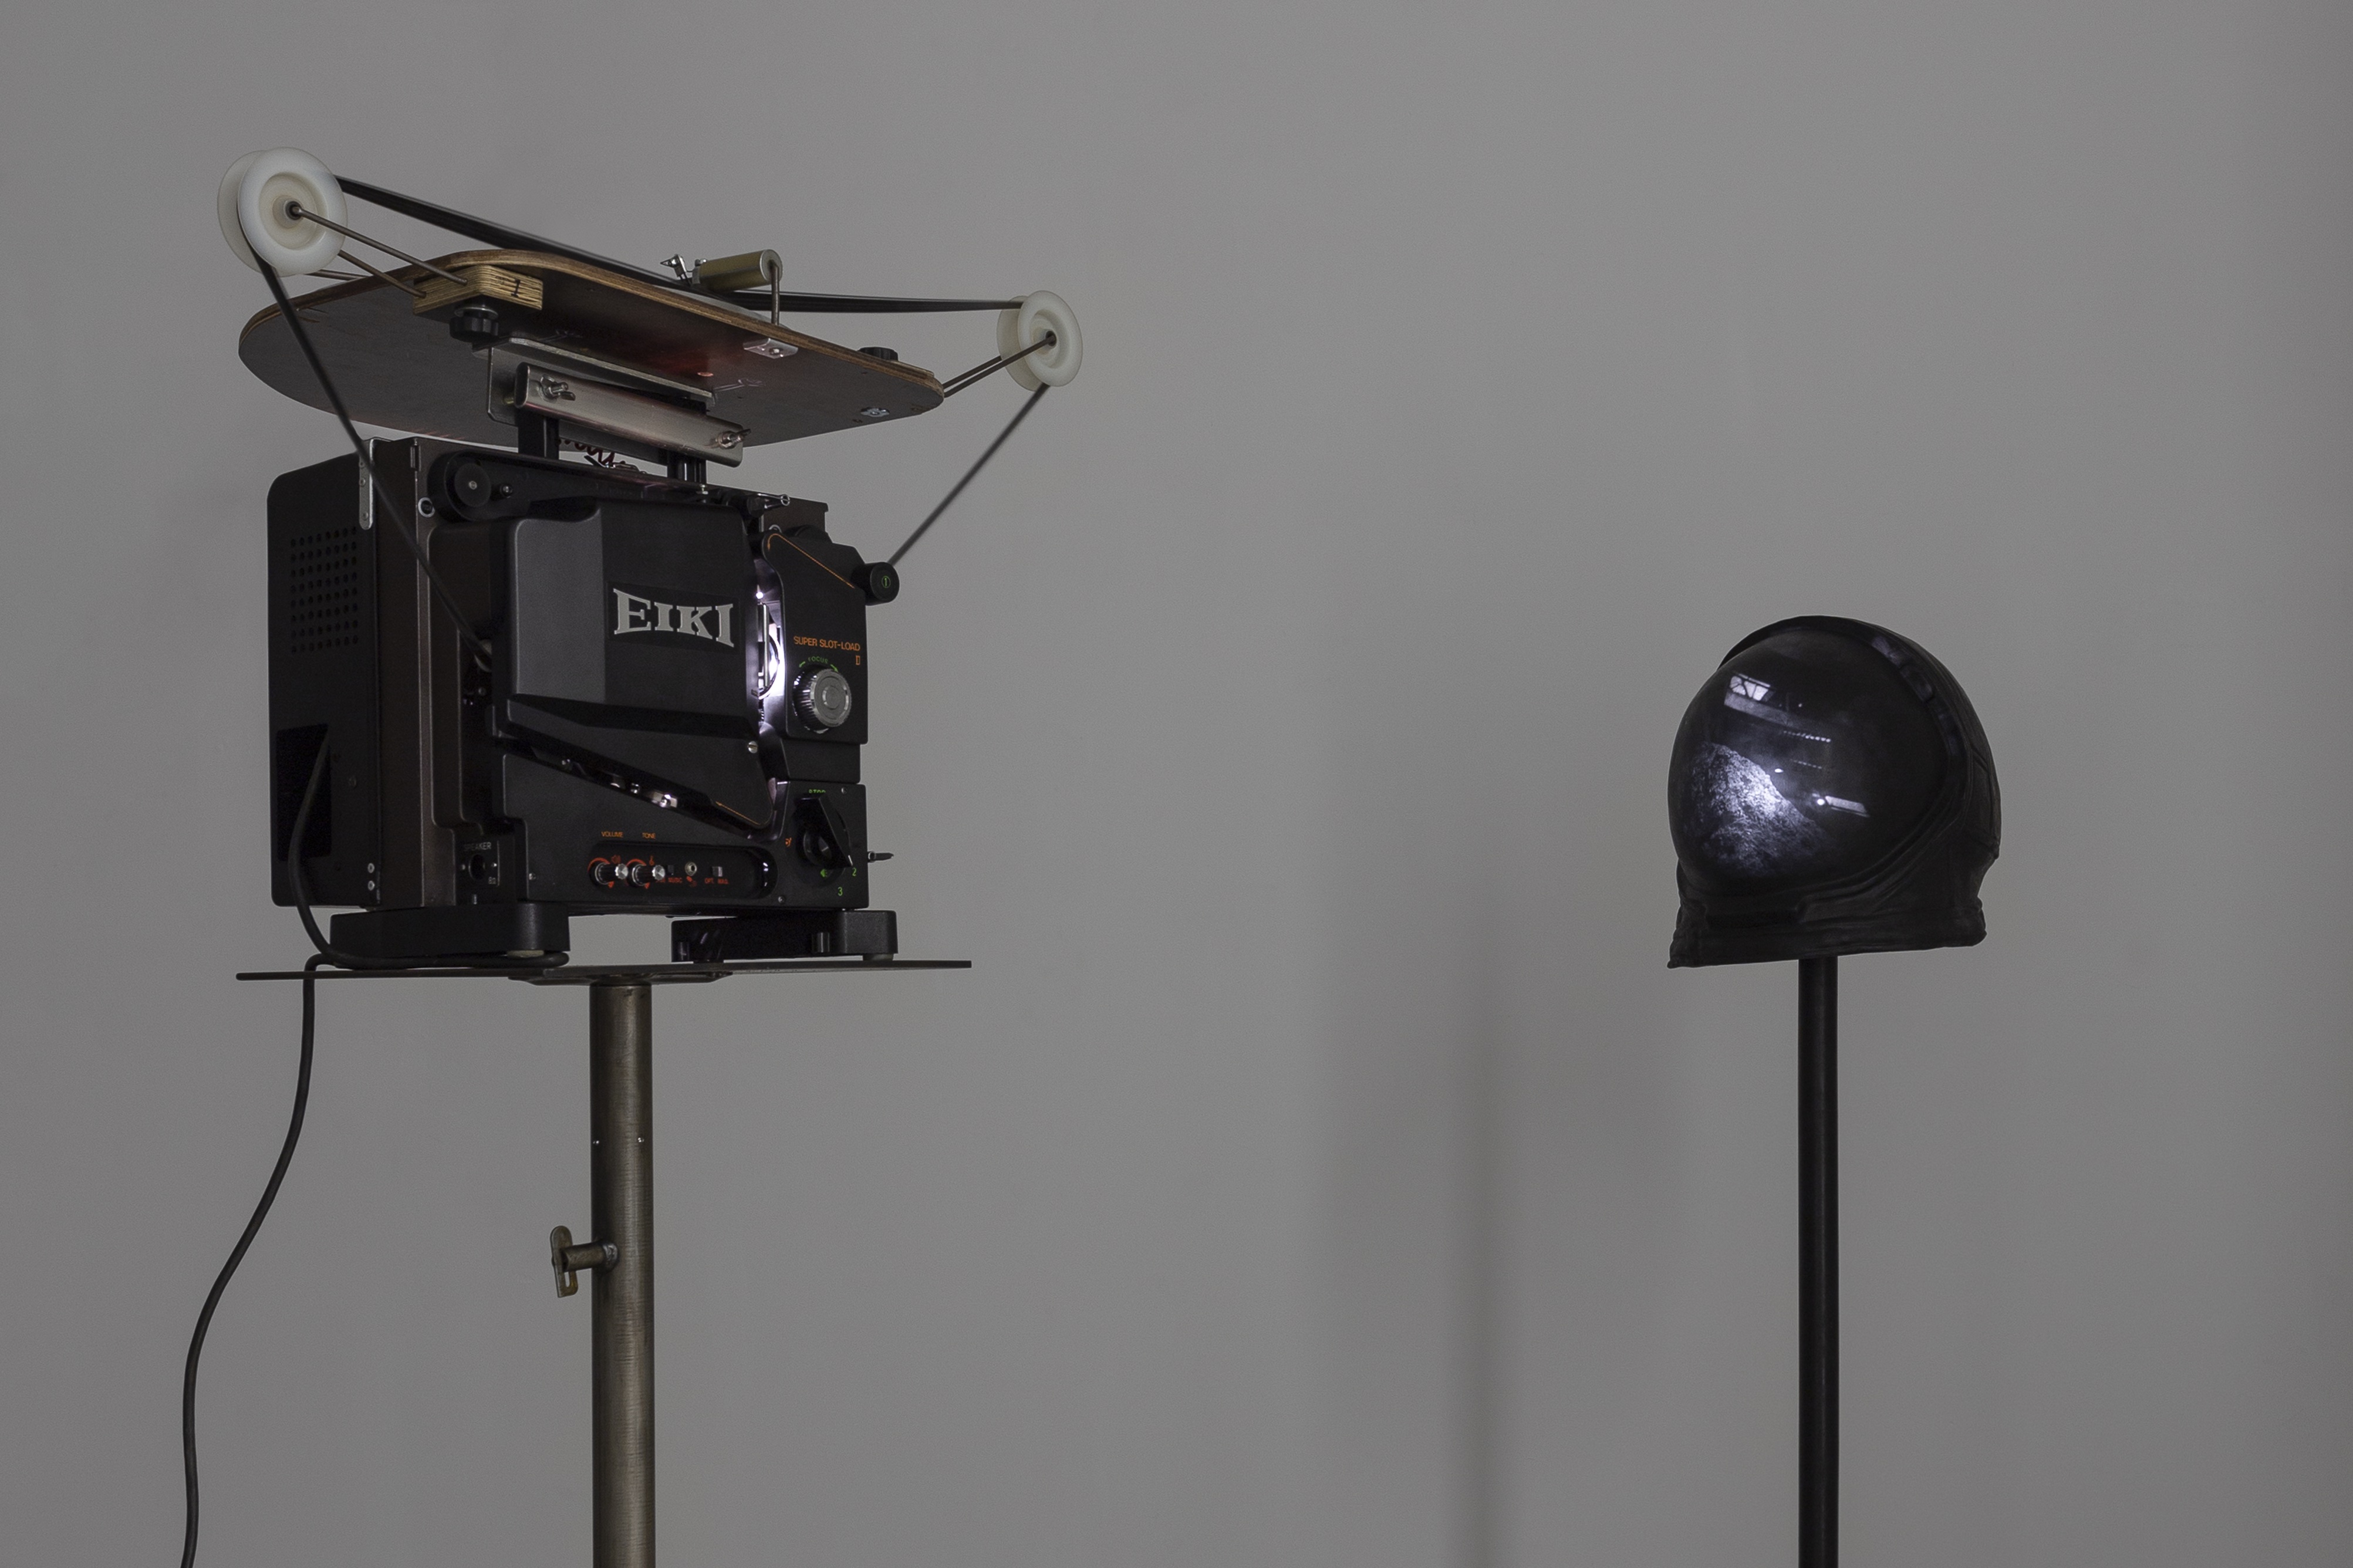 BRONZE, IRON, STEEL, WOOD, 16MM FILM PROJECTOR, LOOPER, 16MM FILM (B/W, SILENT, 2’25”, LOOP) VARIABLE DIMENSIONS INSTALLATION VIEW, ‘SEA OF TRANQUILITY’, FRAME SECTION AT FRIEZE NY AT THE SHED, NEW YORK